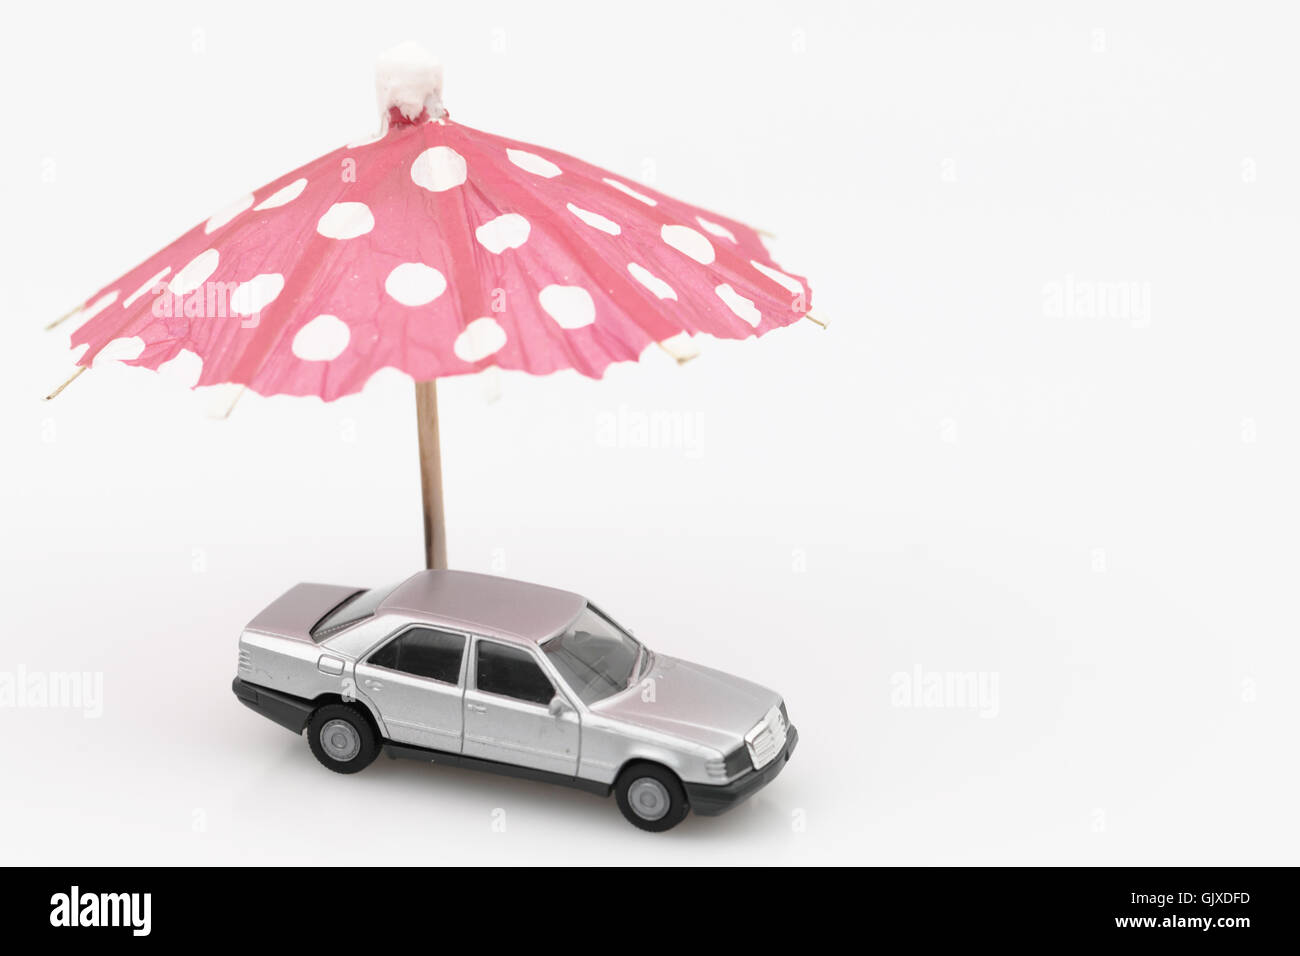 Gray car under red umbrella, isolated on white Stock Photo